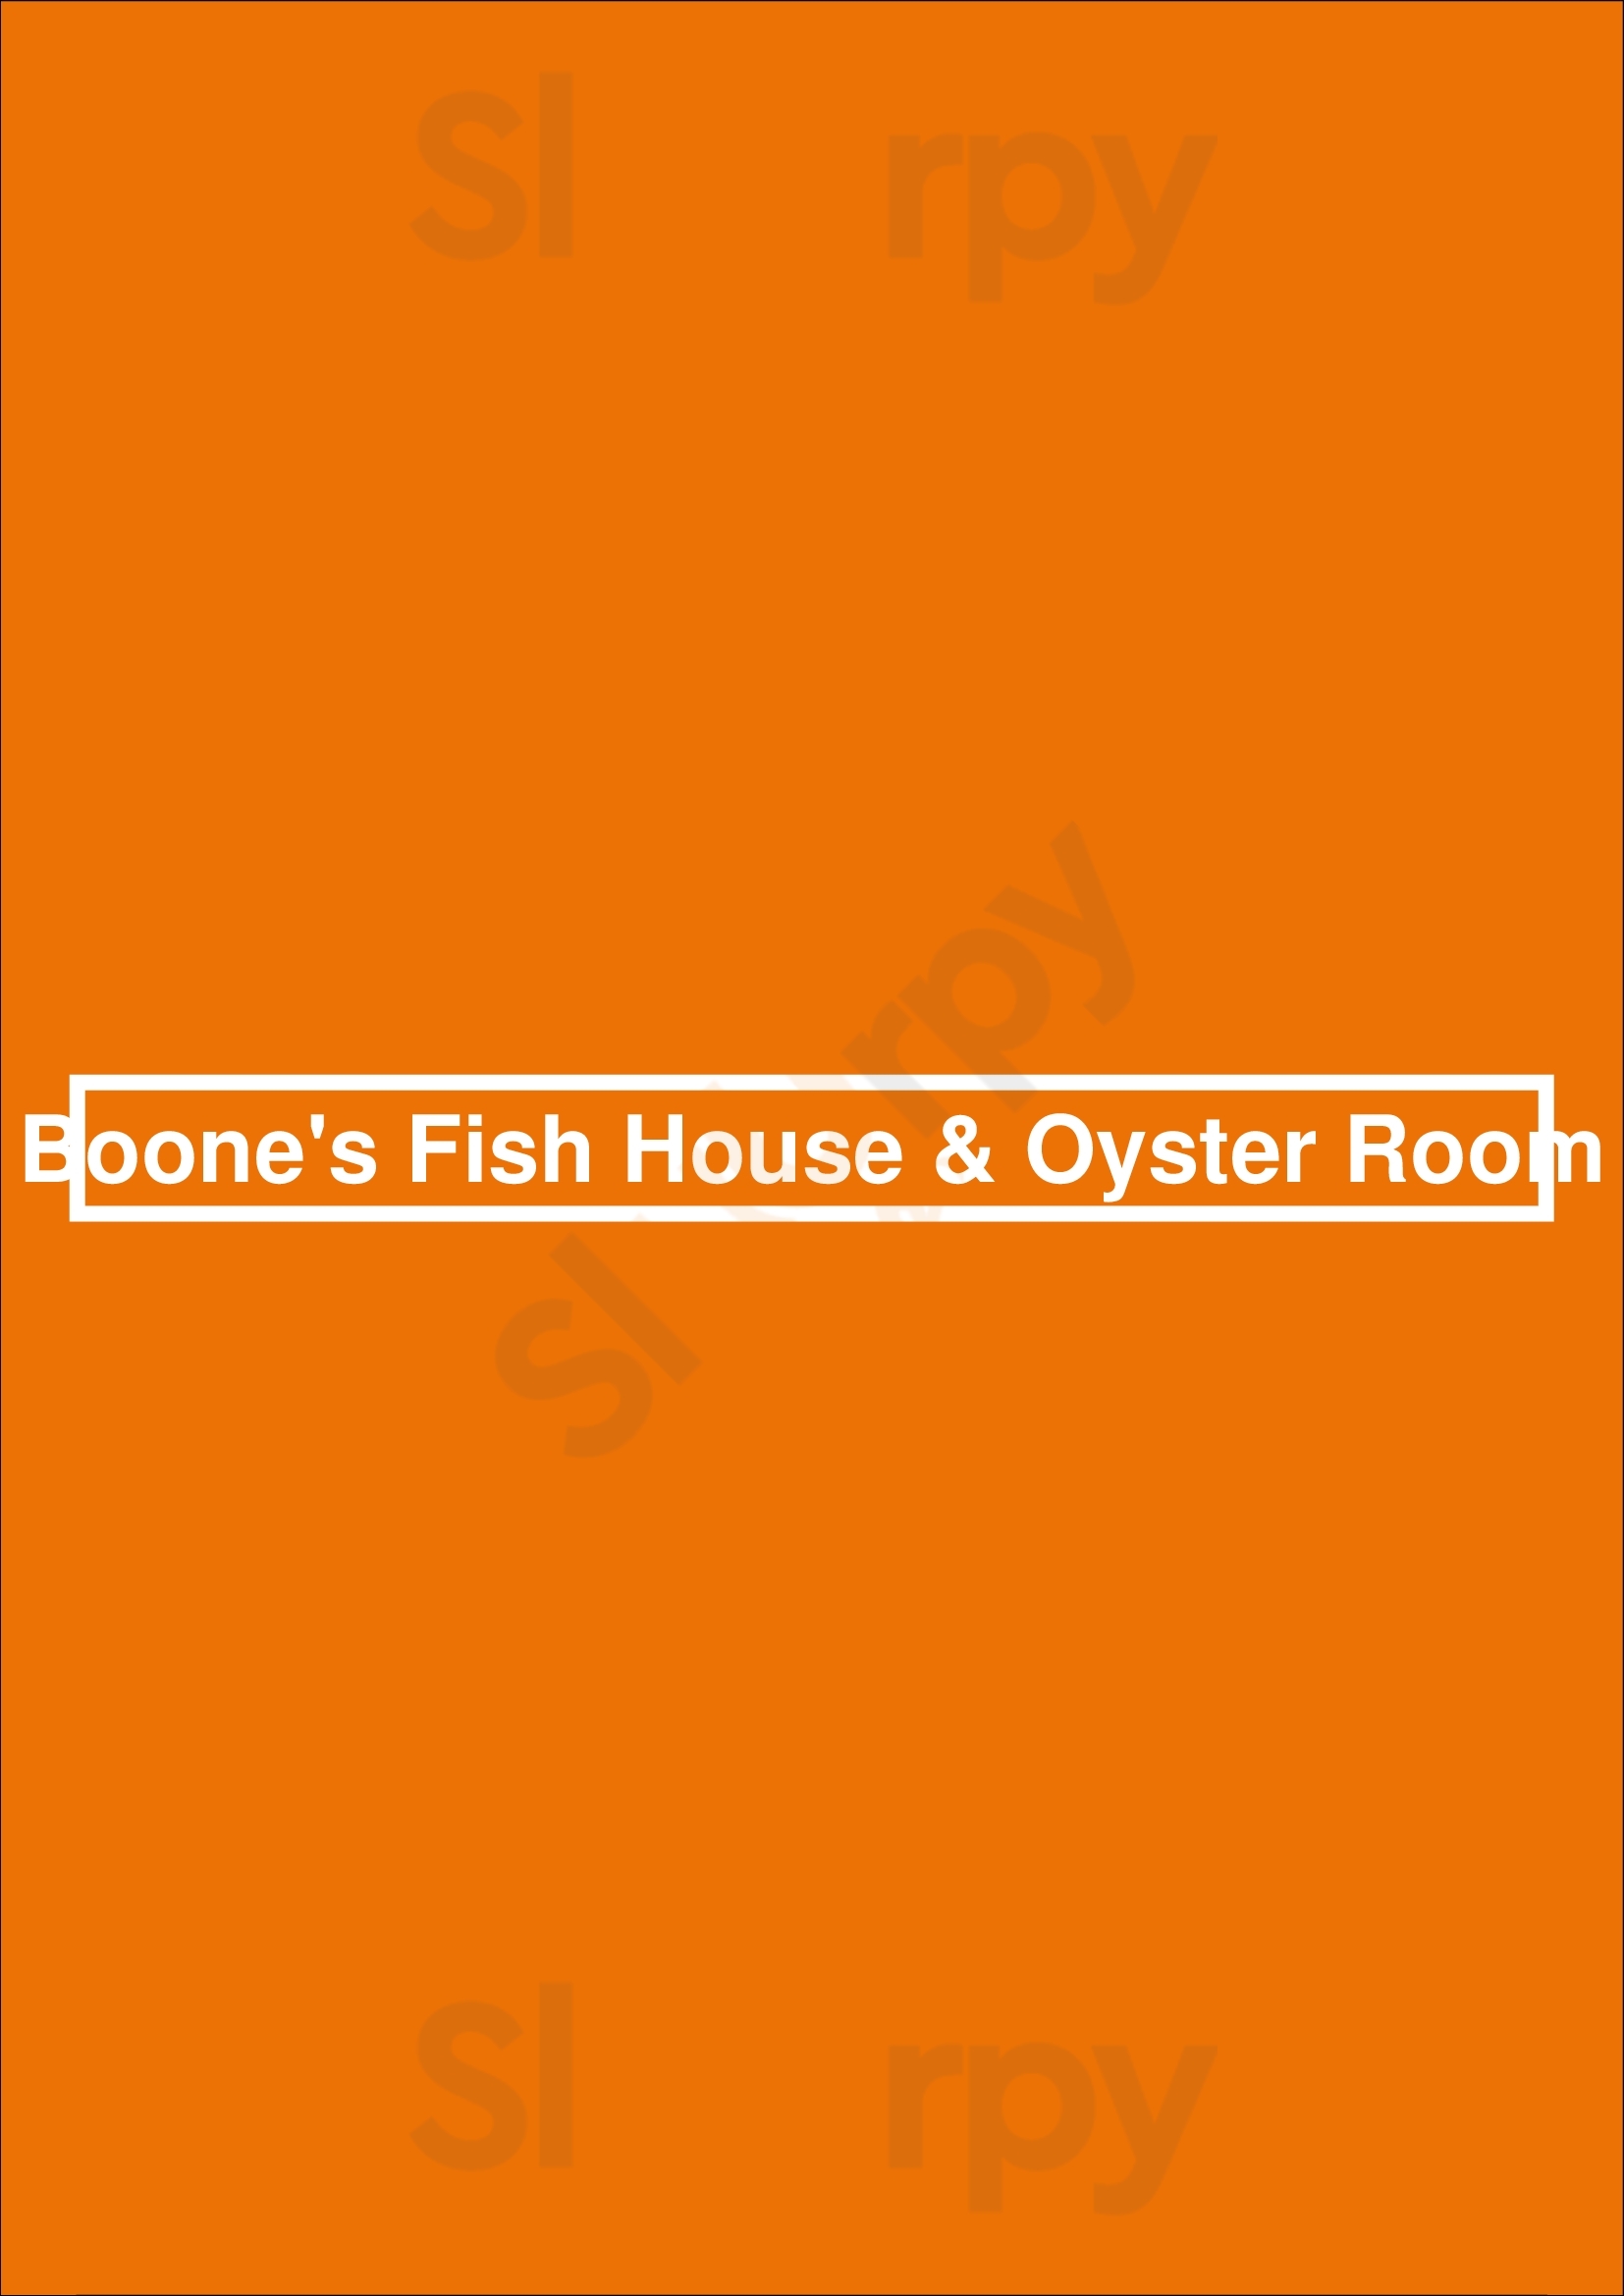 Boone's Fish House & Oyster Room Portland Menu - 1